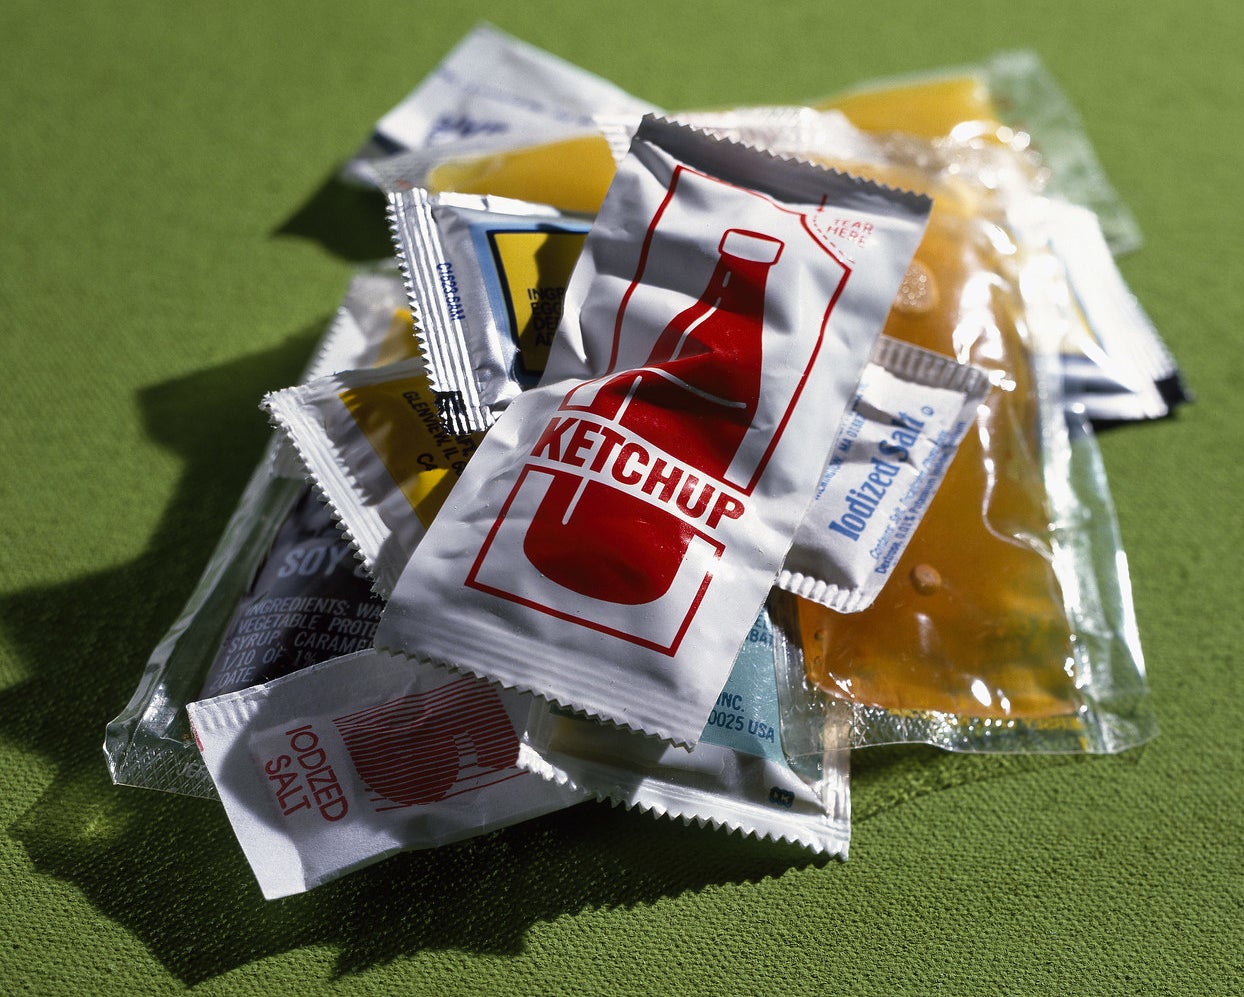 A stack of ketchup, salt, and other condiment packets